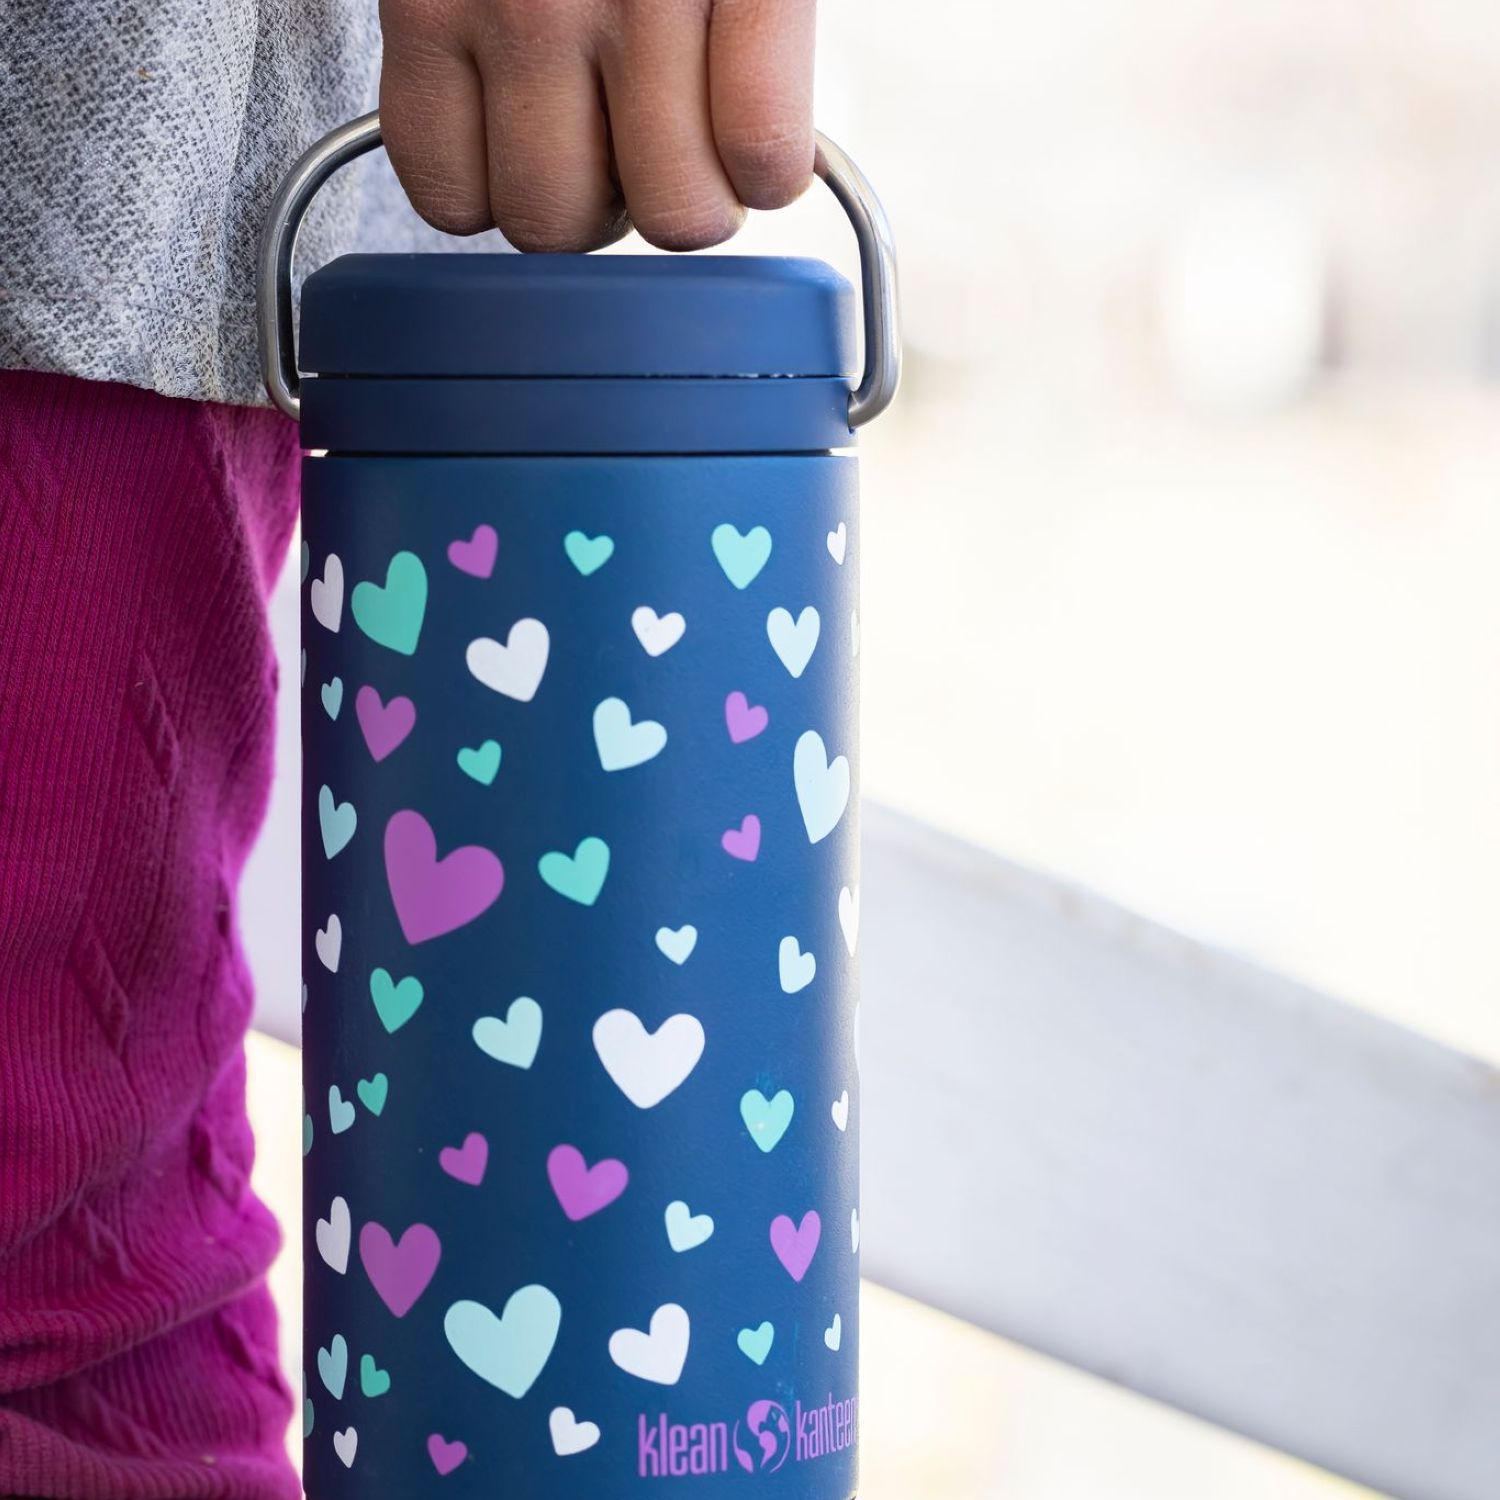 https://www.seager.com.sg/wp-content/uploads/2023/02/Klean-Kanteen-Insulated-TKWide-12oz-Water-Bottle-with-Cafe-Cap-V2-Navy-Hearts-3.jpg